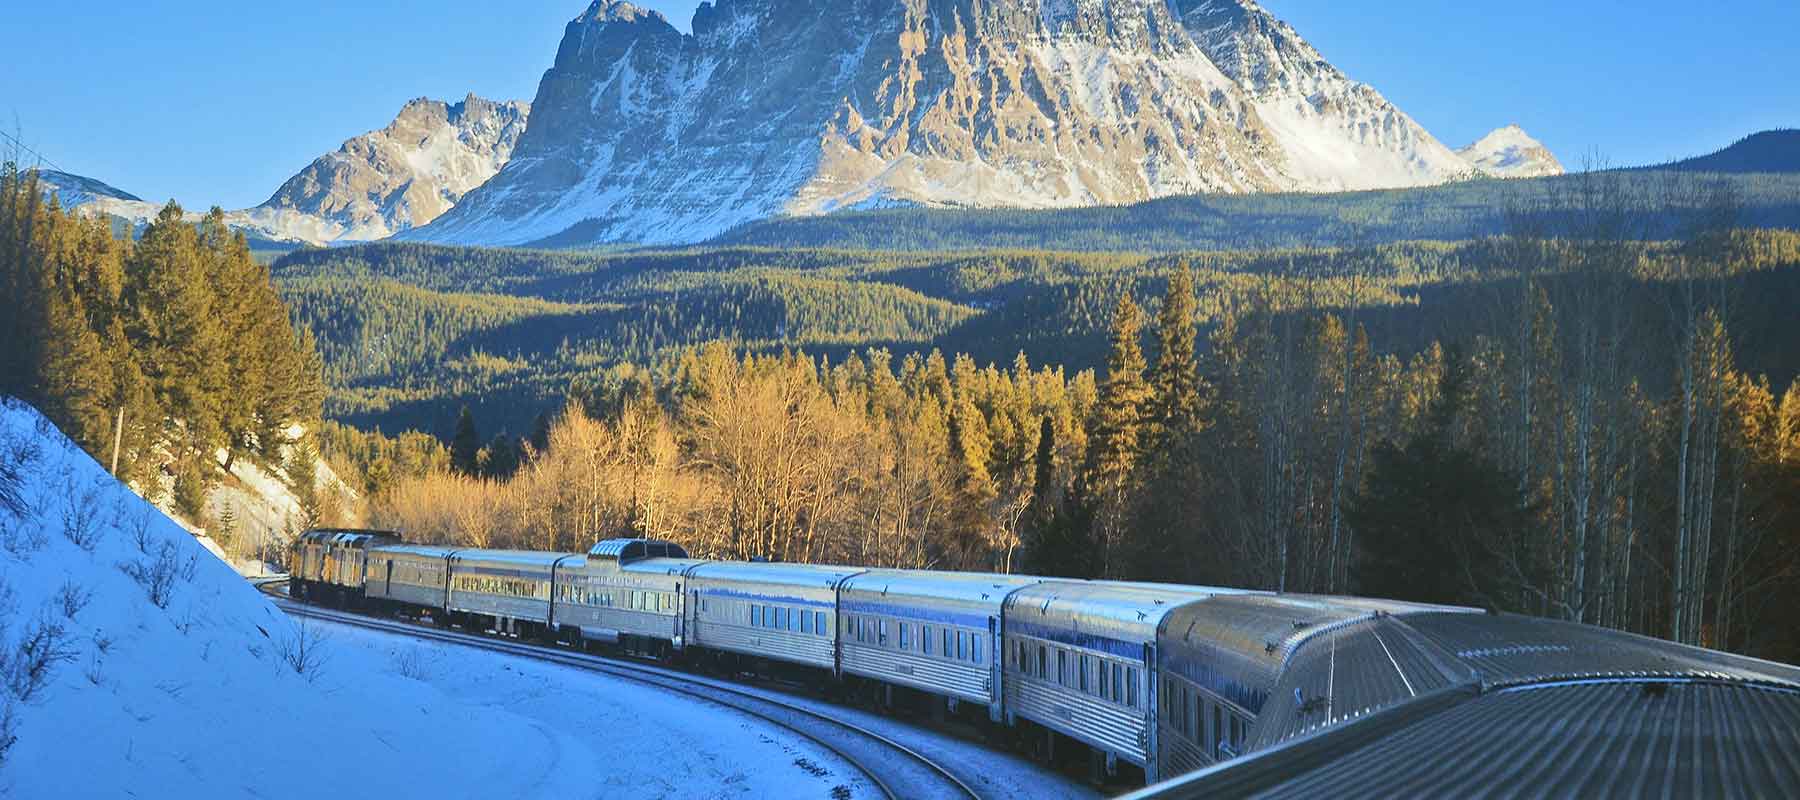 12 Things You Should Know About Traveling To The Canadian Rockies in Winter  - Dreaming and Wandering